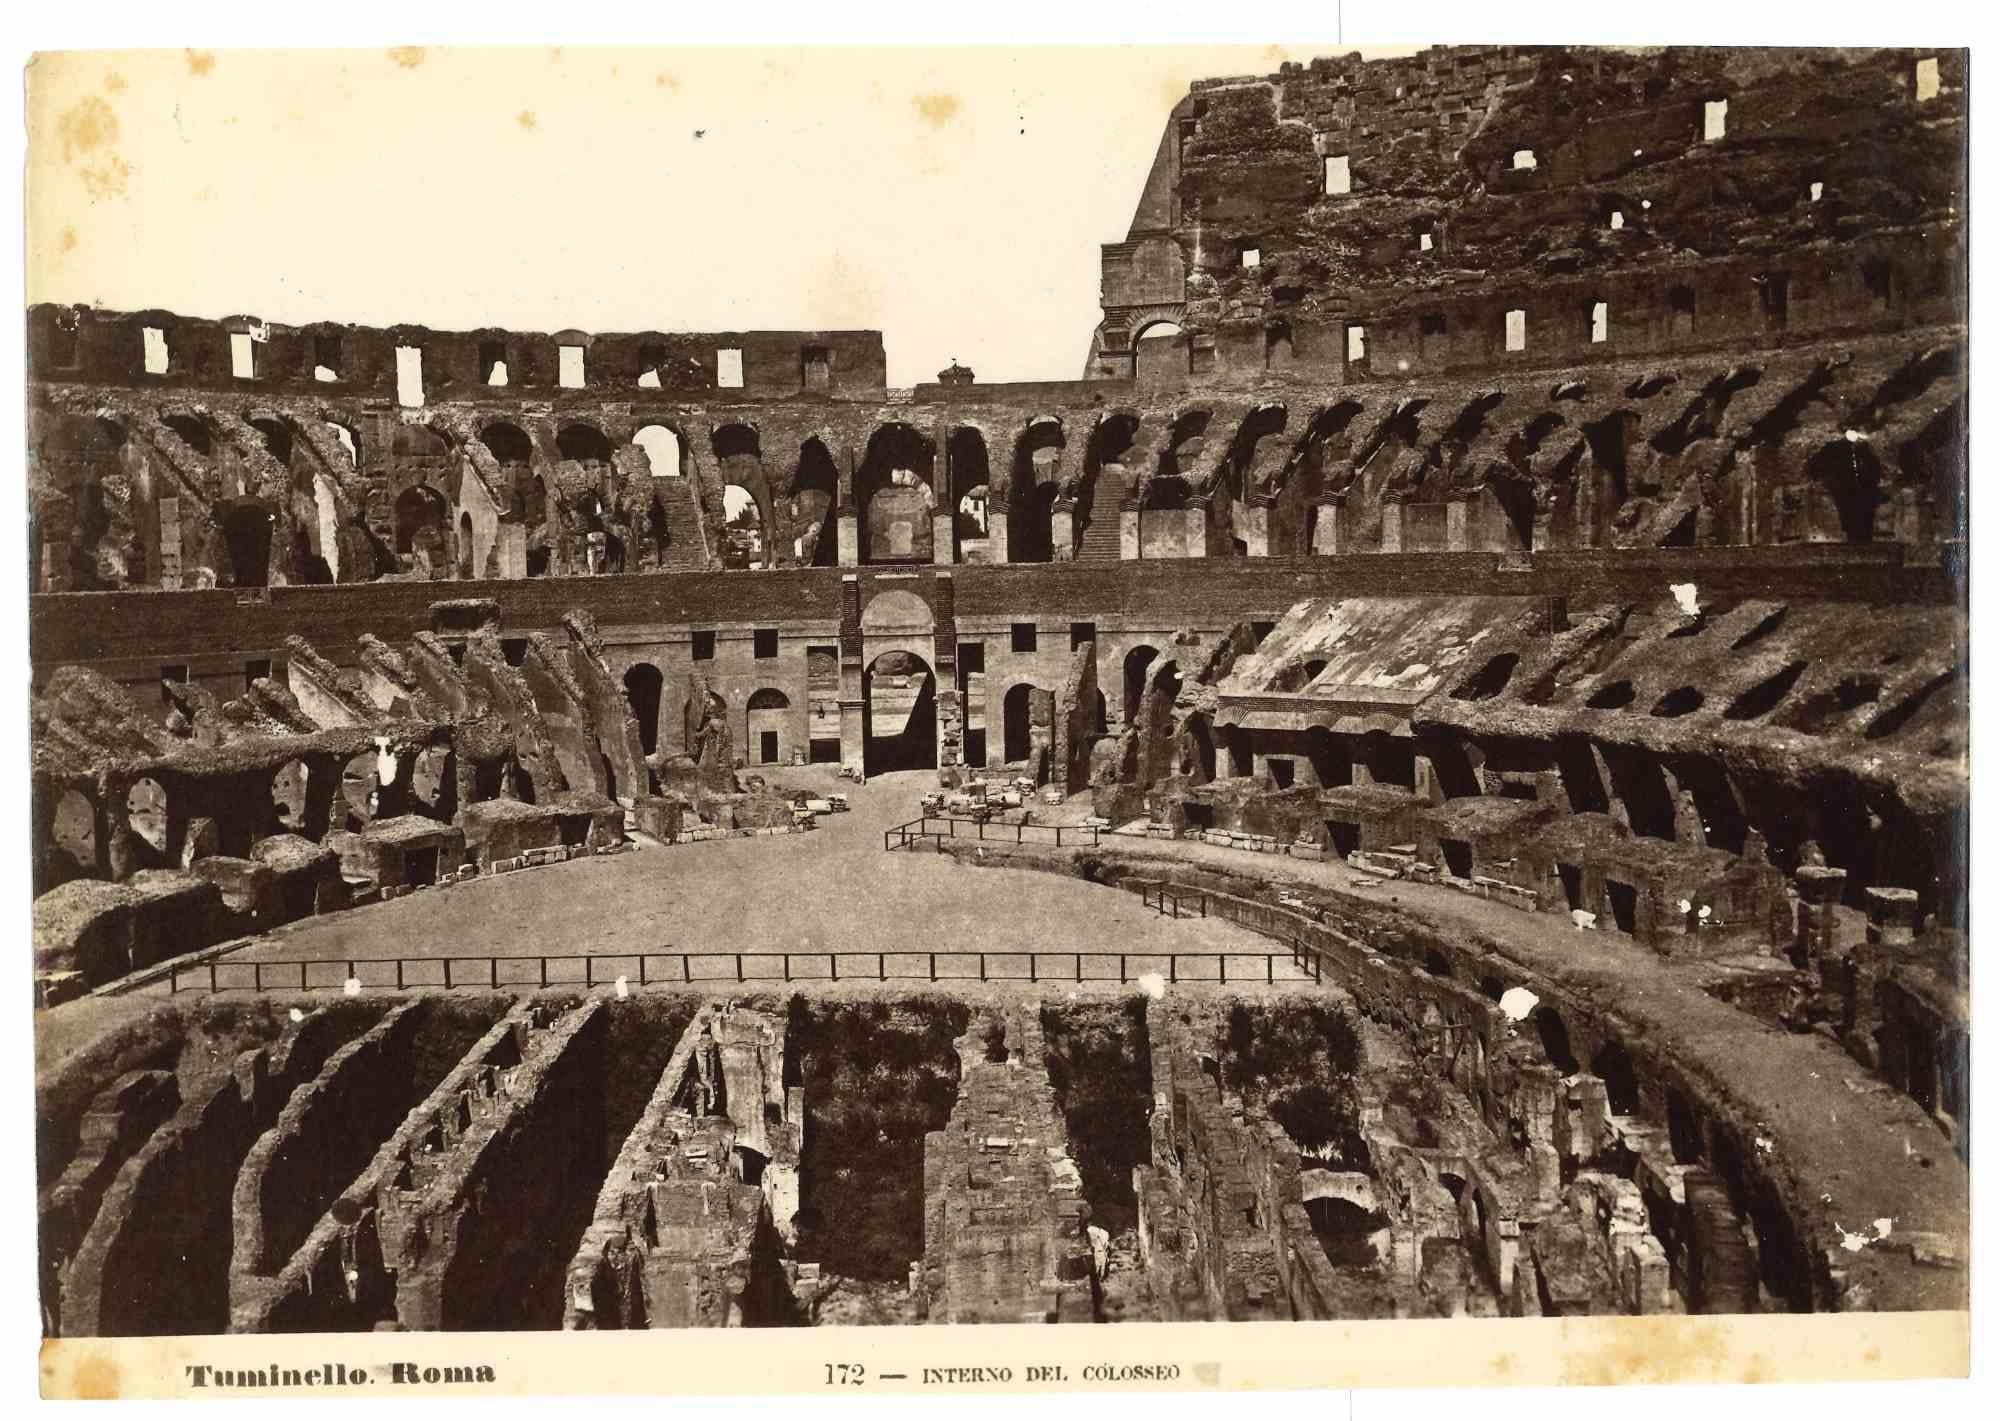 Colosseum - Vintage Photo by Ludovico Tuminello - Early 20th Century